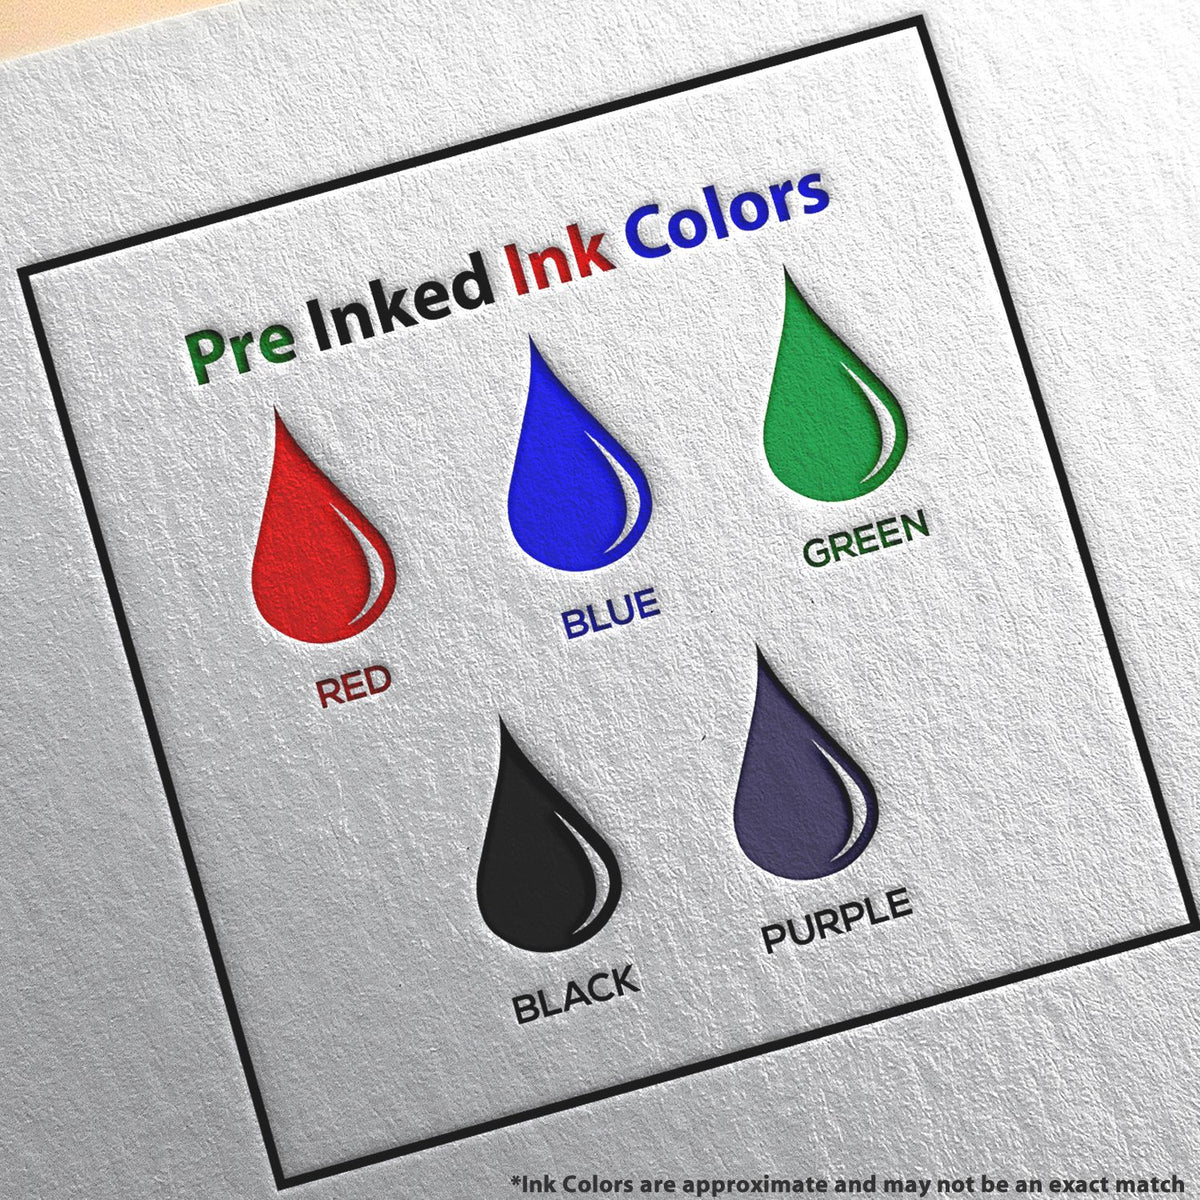 A picture showing the different ink colors or hues available for the Super Slim Delaware Notary Public Stamp product.